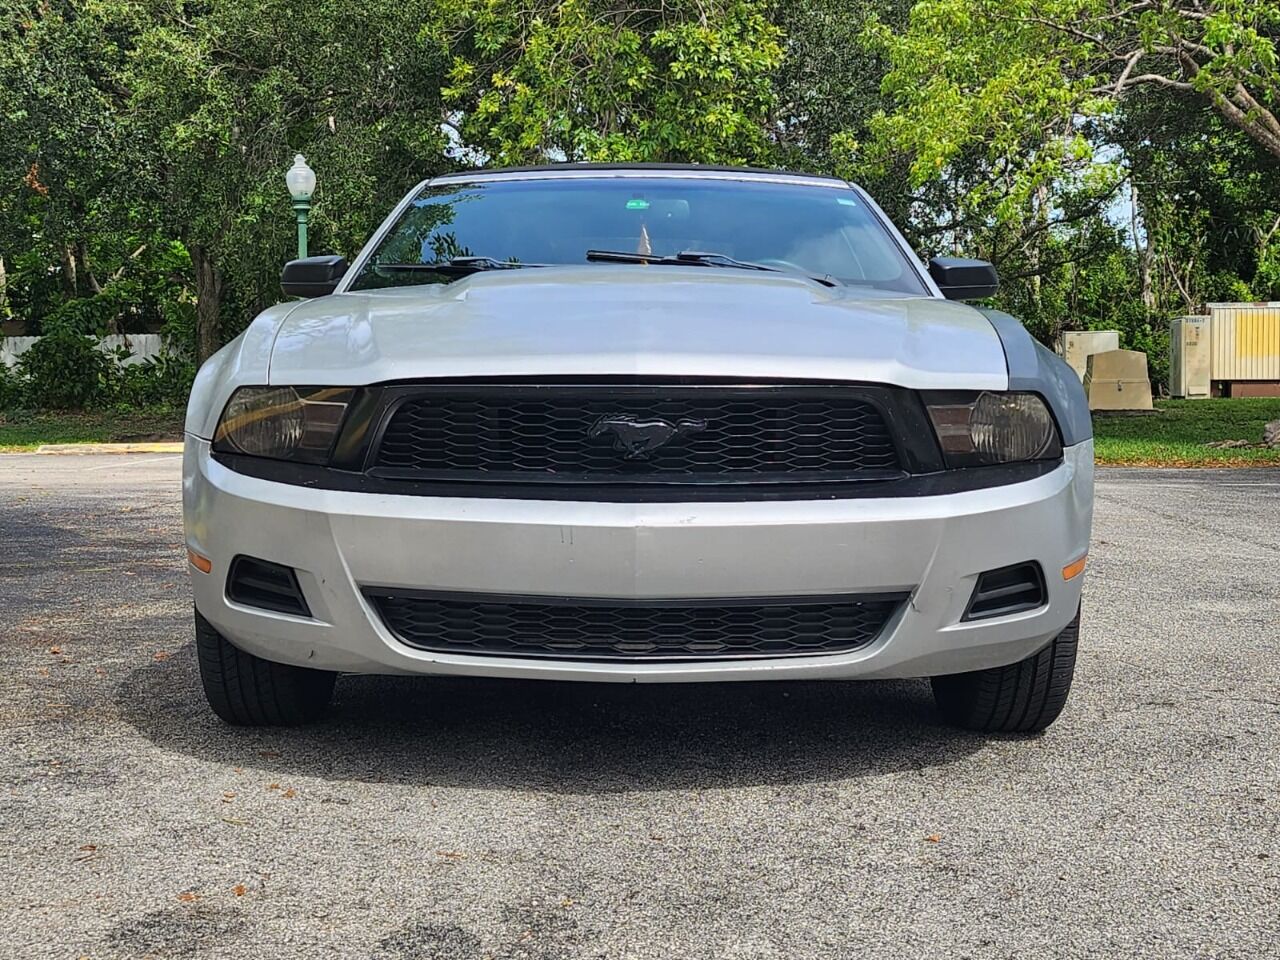 2010 FORD Mustang Convertible - $9,995